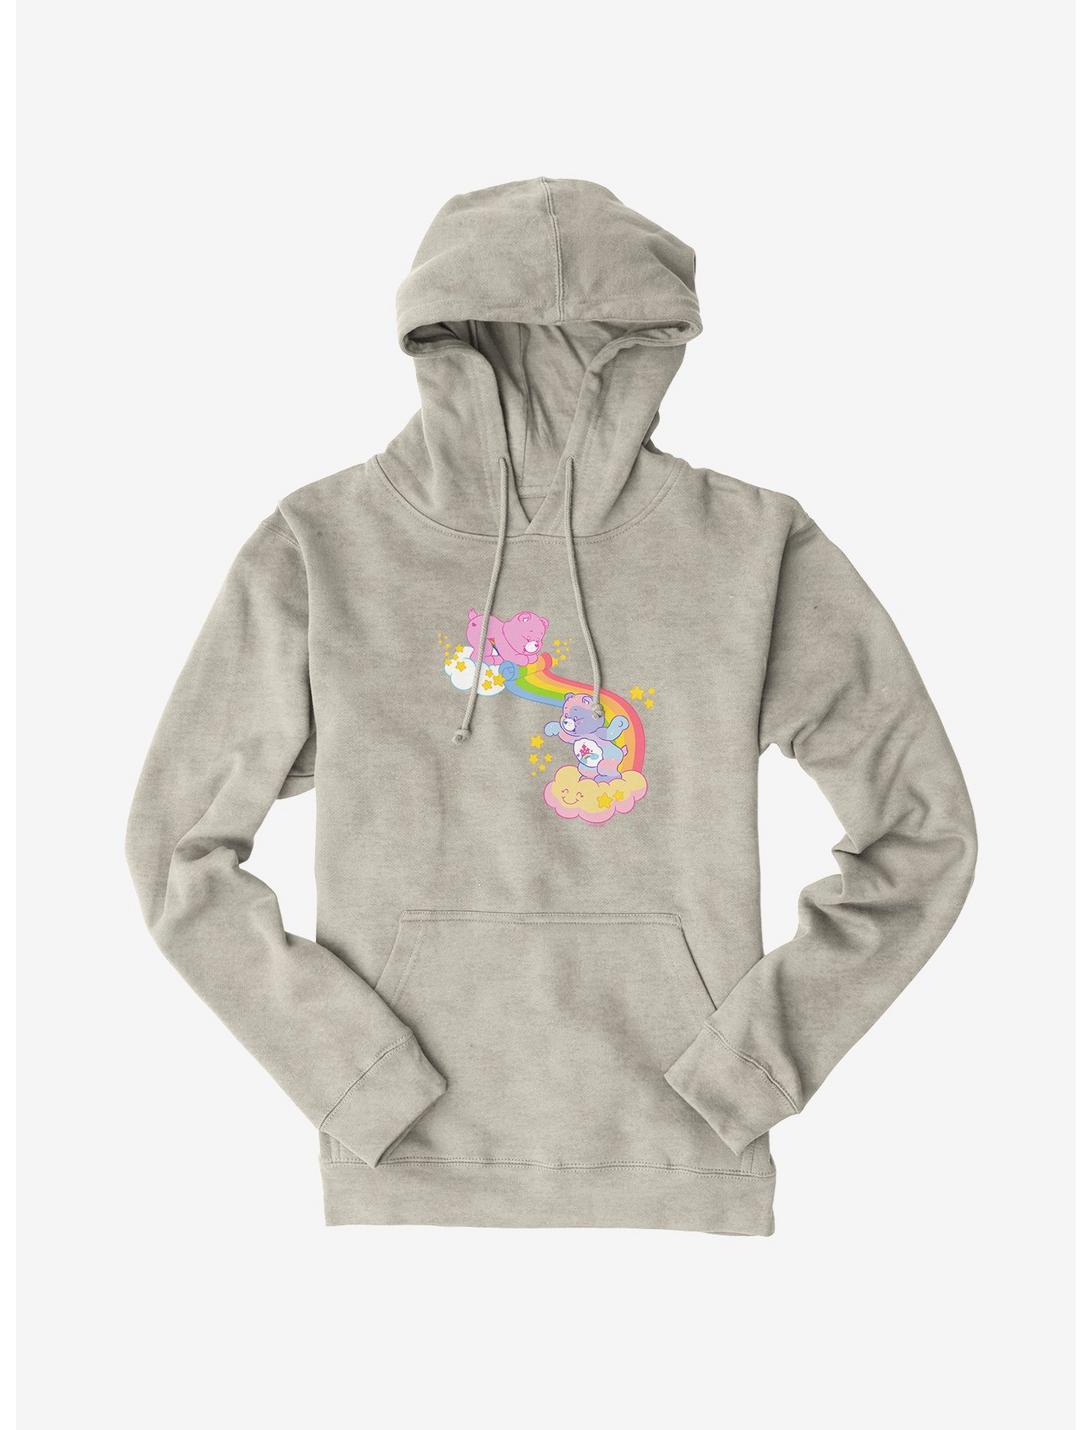 Care Bears In The Clouds Hoodie, OATMEAL HEATHER, hi-res